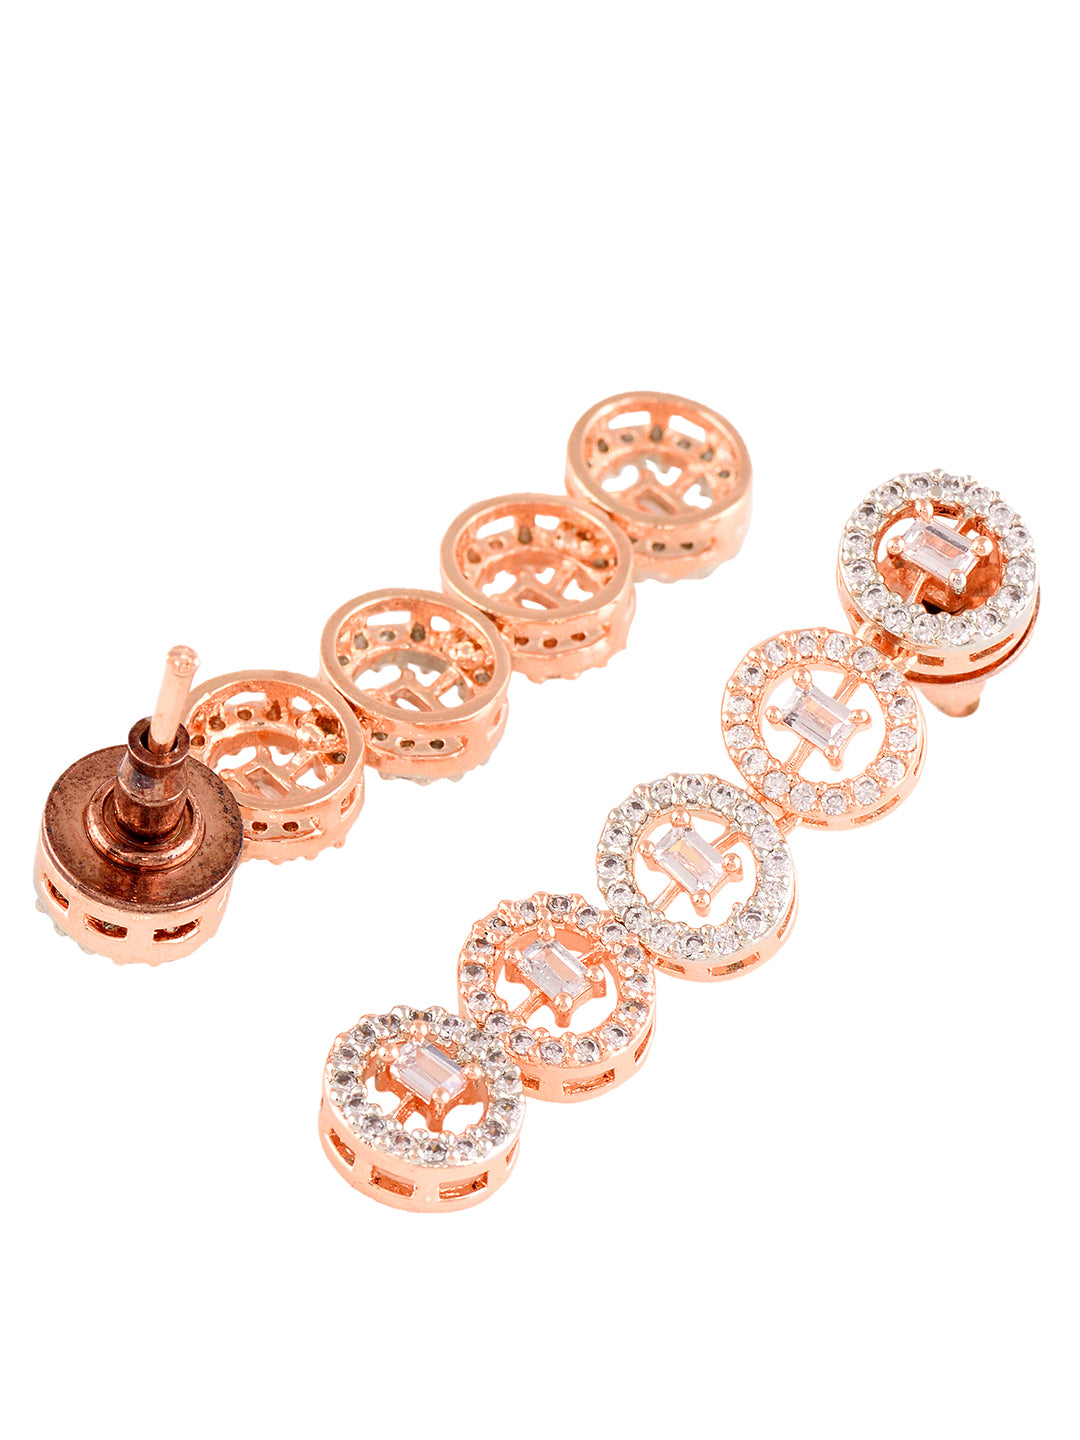 Rose Gold Plated White AD Studded Handcrafted Contemporary Jewellery Set Dropdown Earrings, zaveri pearls, sale price rs, sale price, sale gold plated, sale gold, sale, rubans, ring, regular 